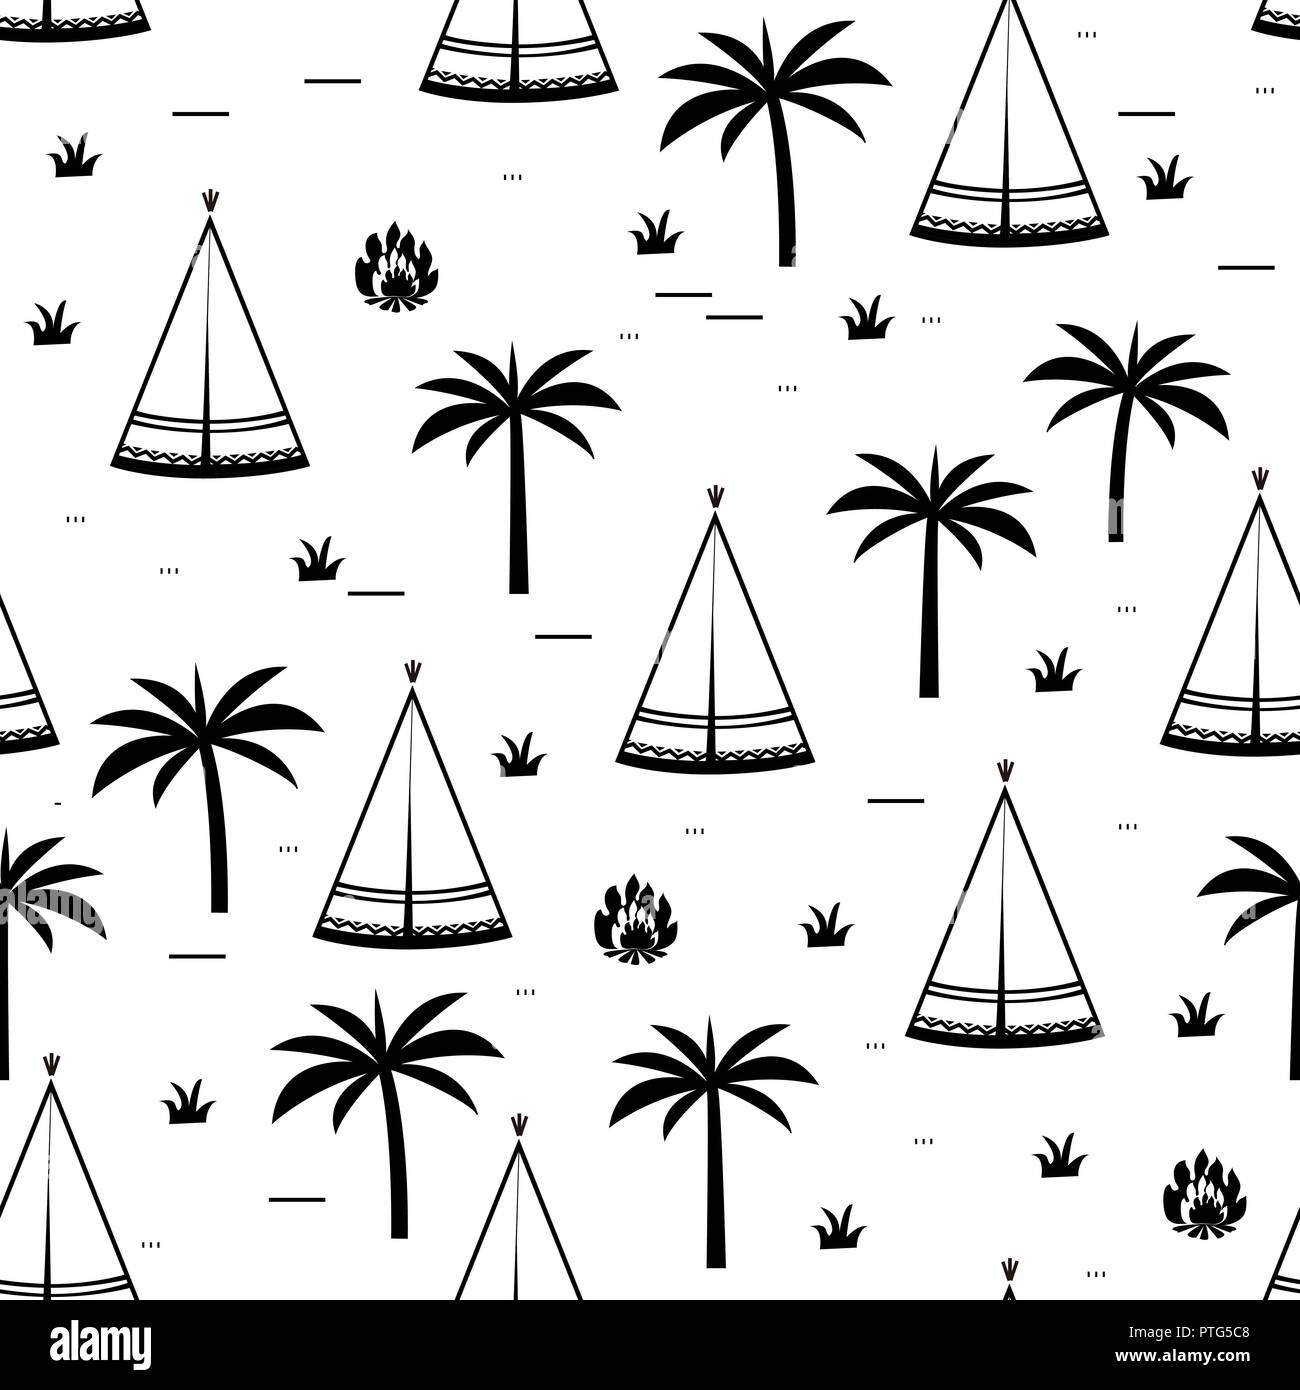 Teepee native american summer tent illustration in vector. Wigwams in palm jungle. Seamless pattern, black and white Stock Vector